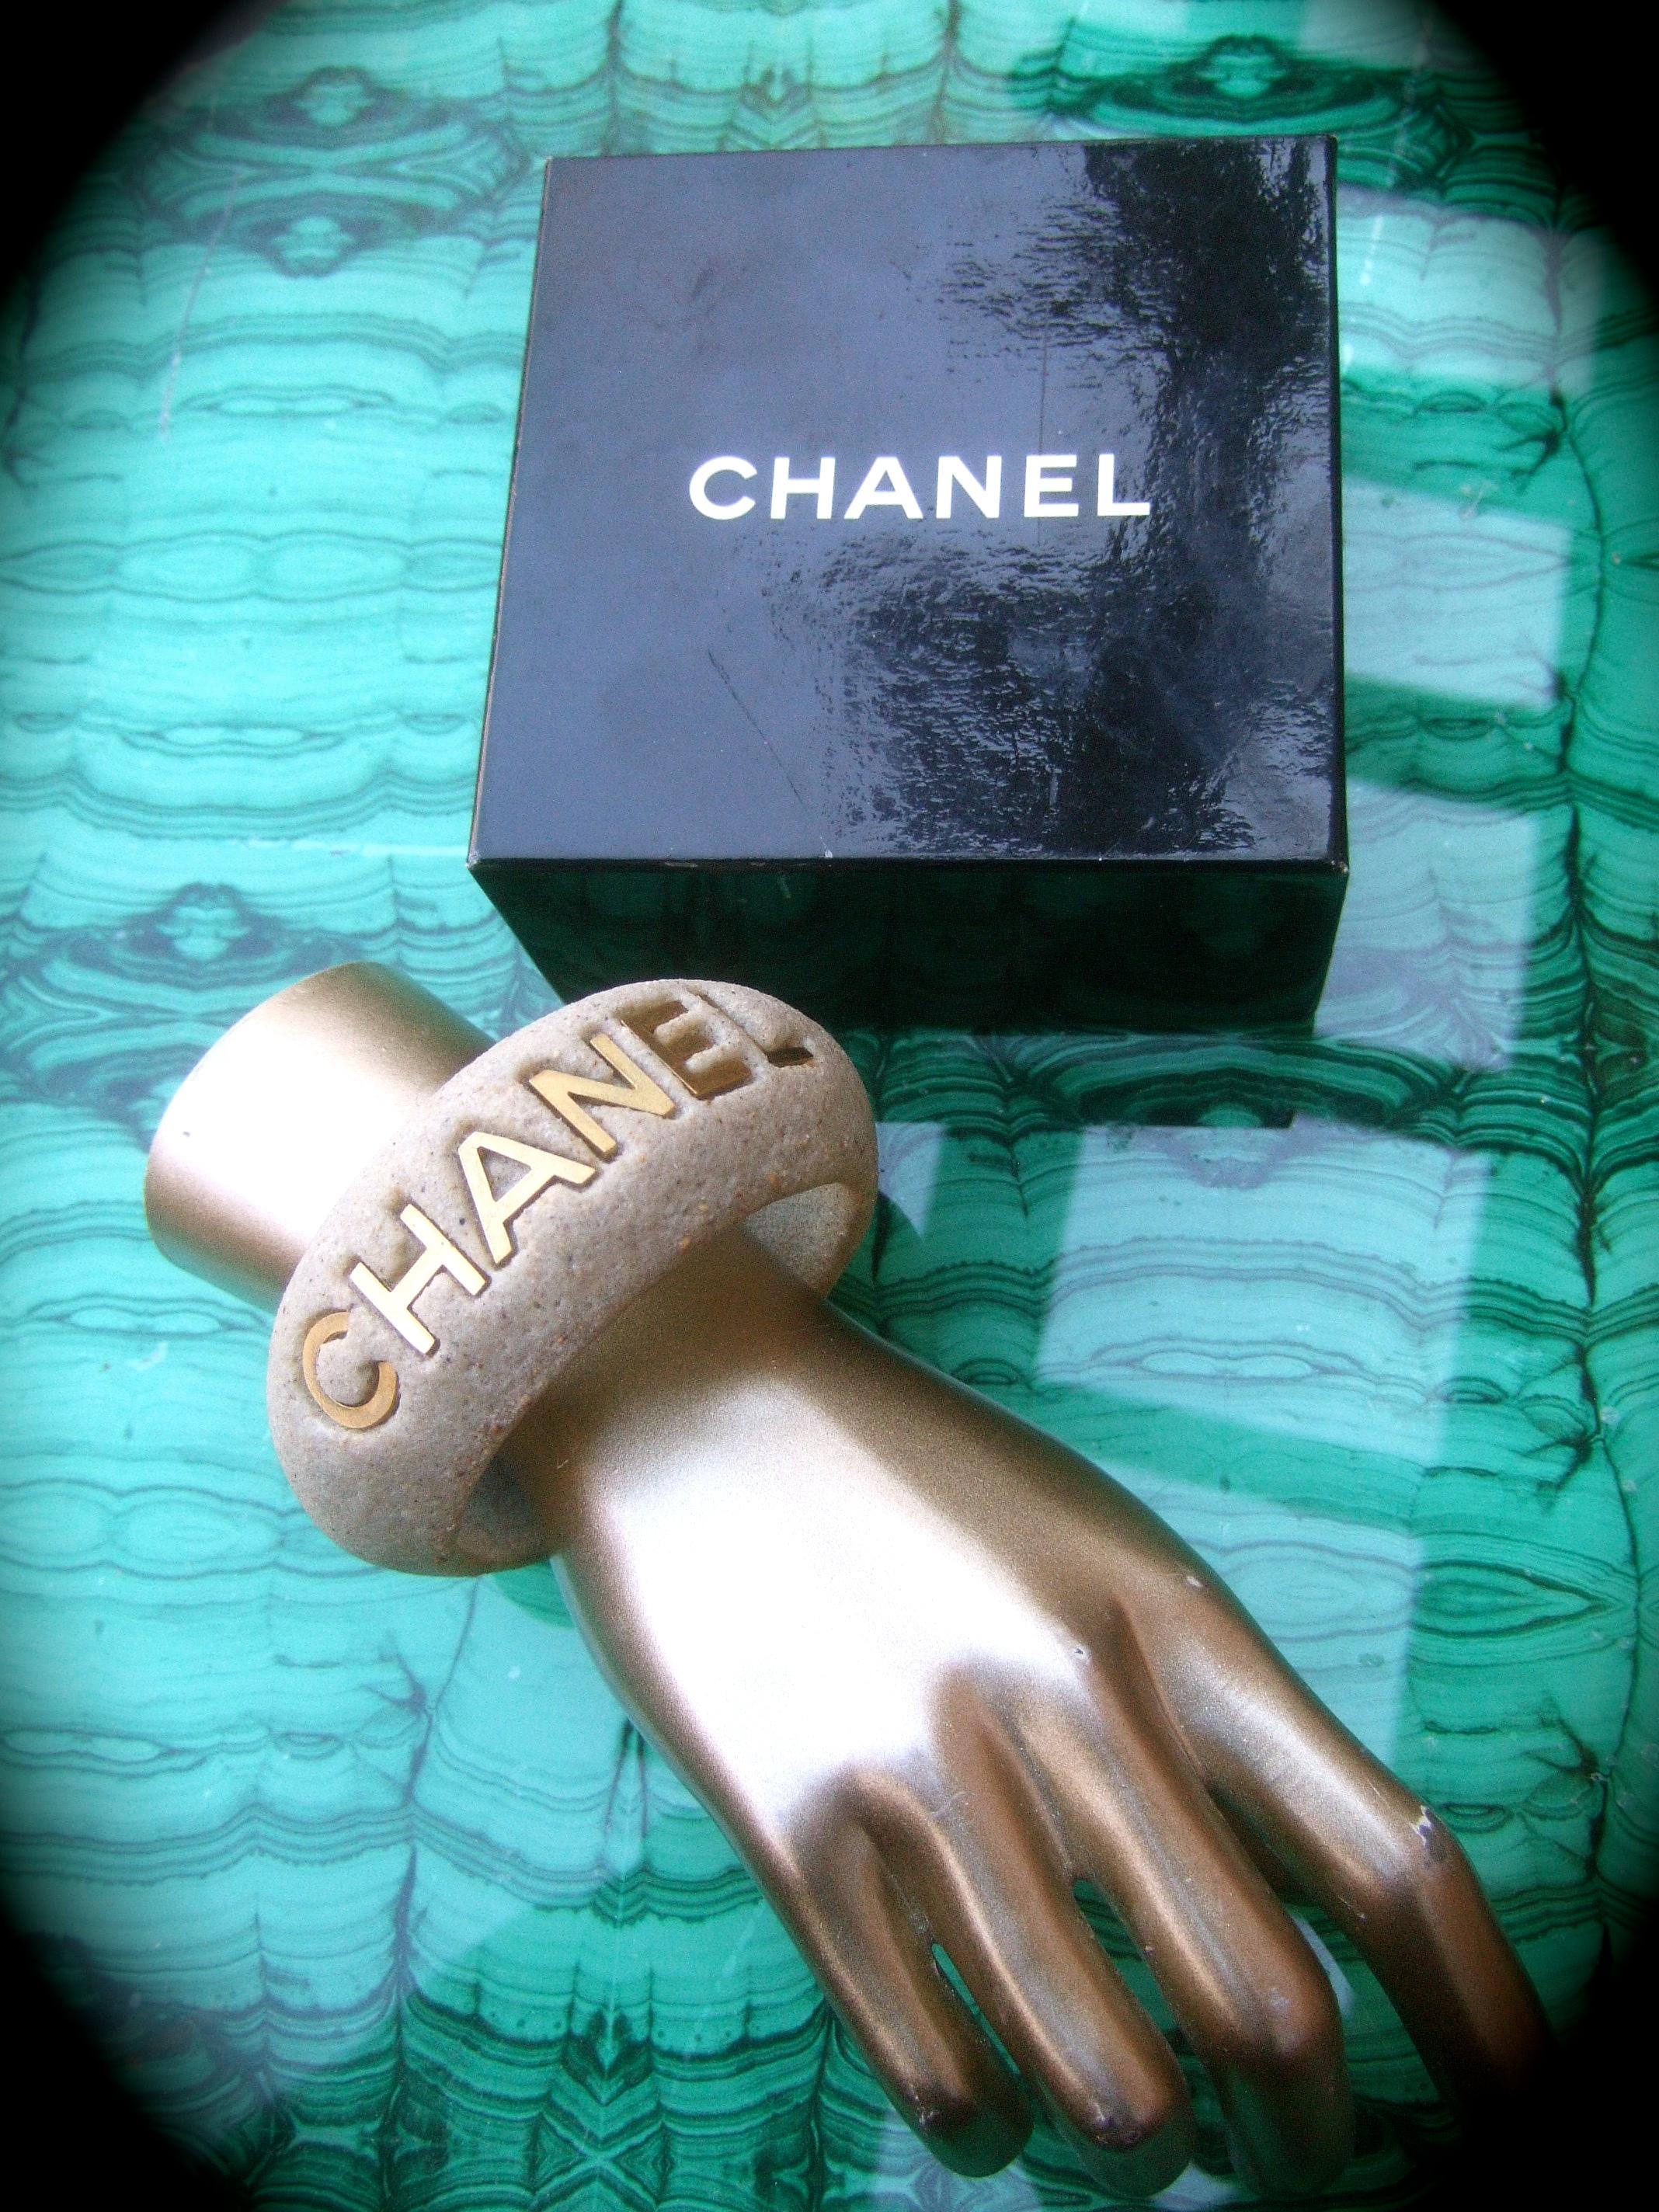 Chanel Wide Molded Bisque Stone Cuff Bracelet in Chanel Presentation Box c 1990s In Good Condition For Sale In University City, MO